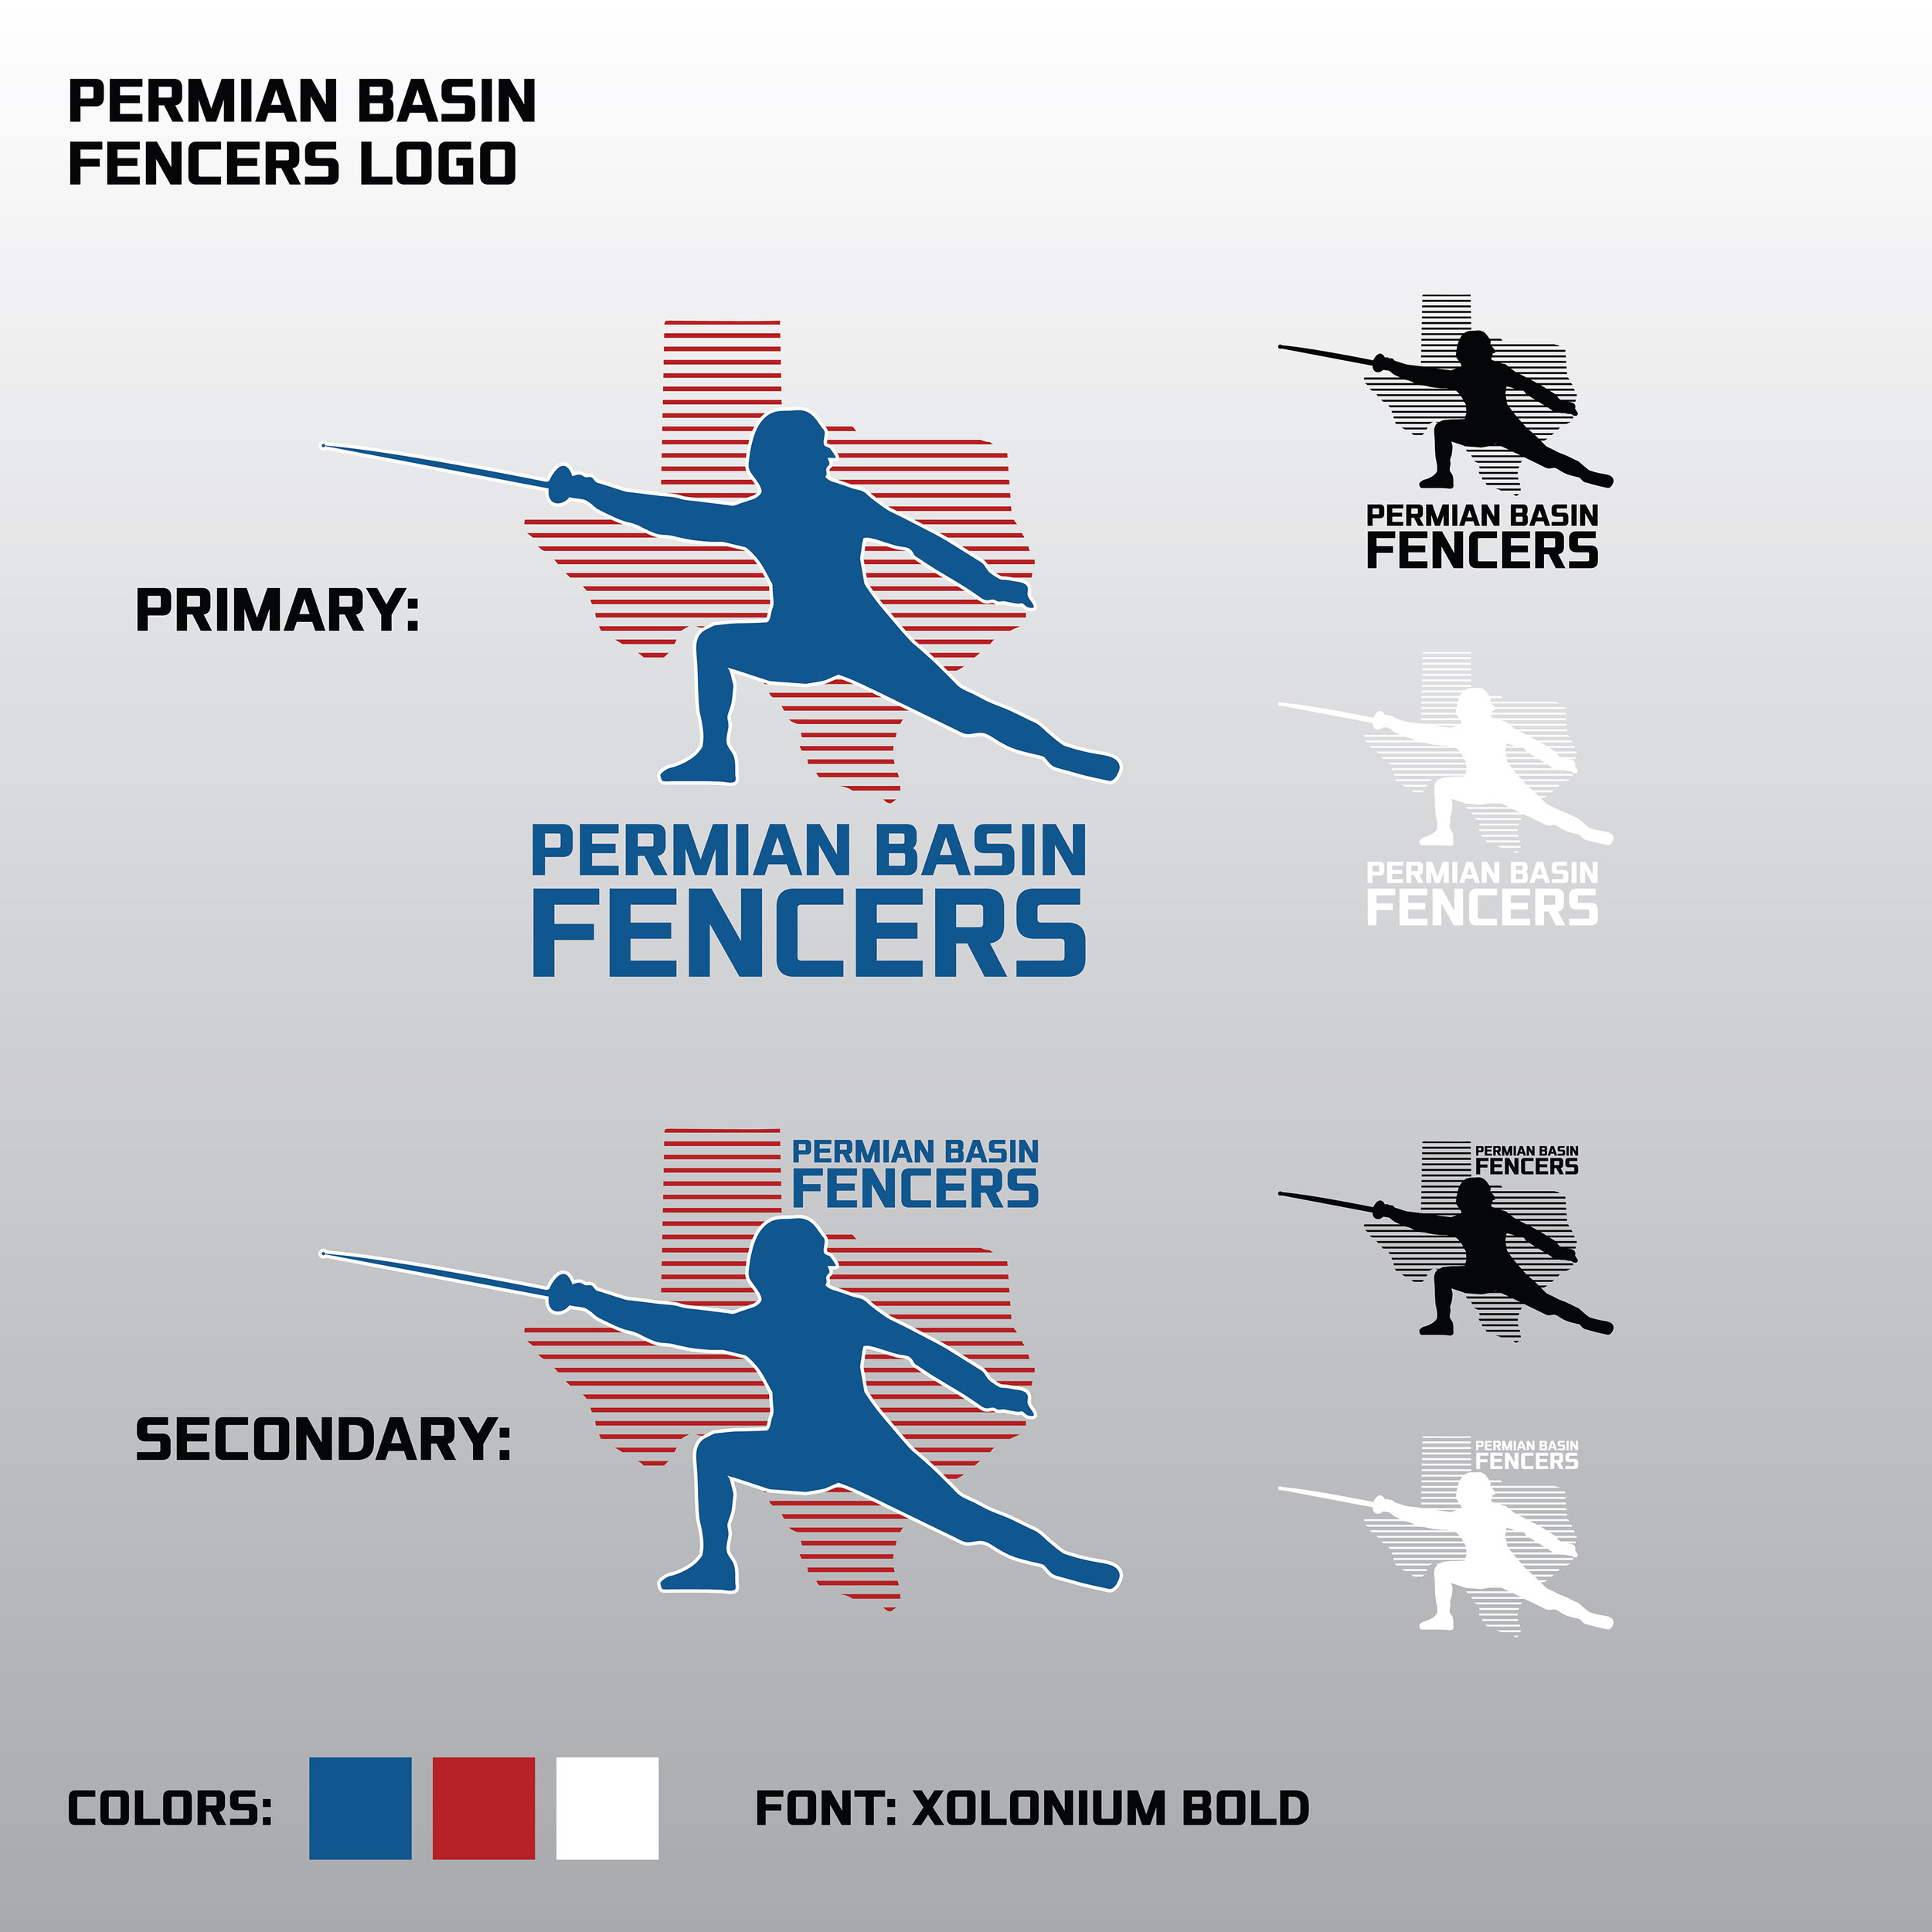 Permian Basin Fencers - Logo Design and Primary Branding.jpg